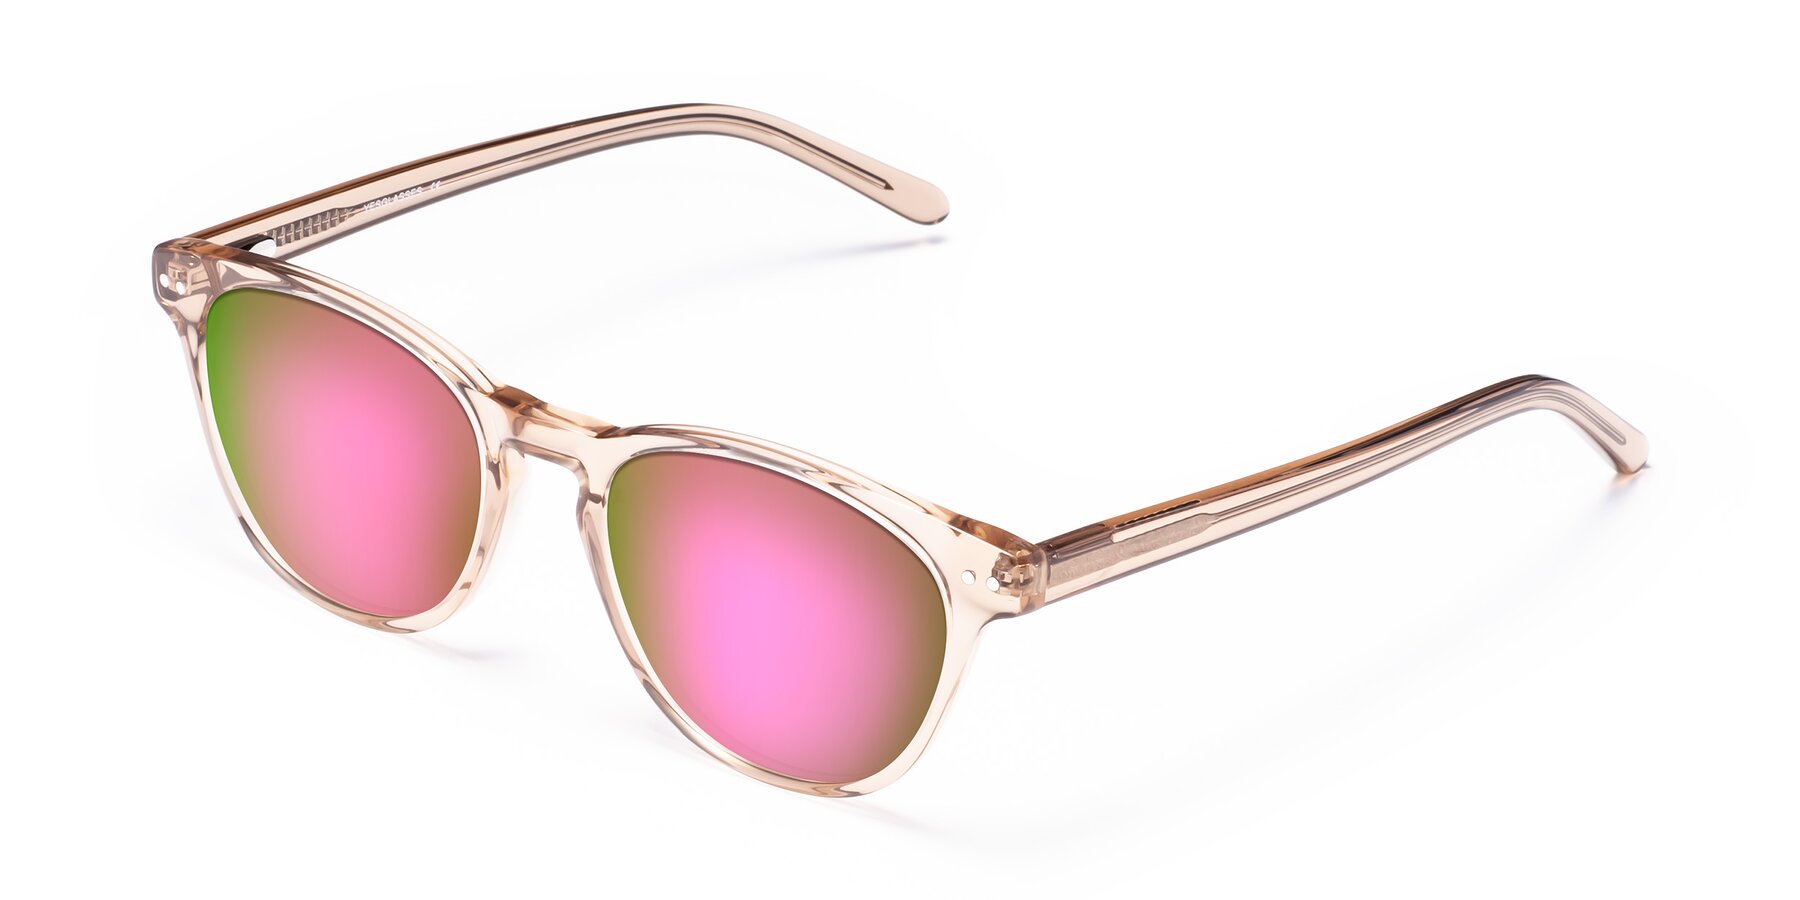 Angle of Blaze in light Brown with Pink Mirrored Lenses